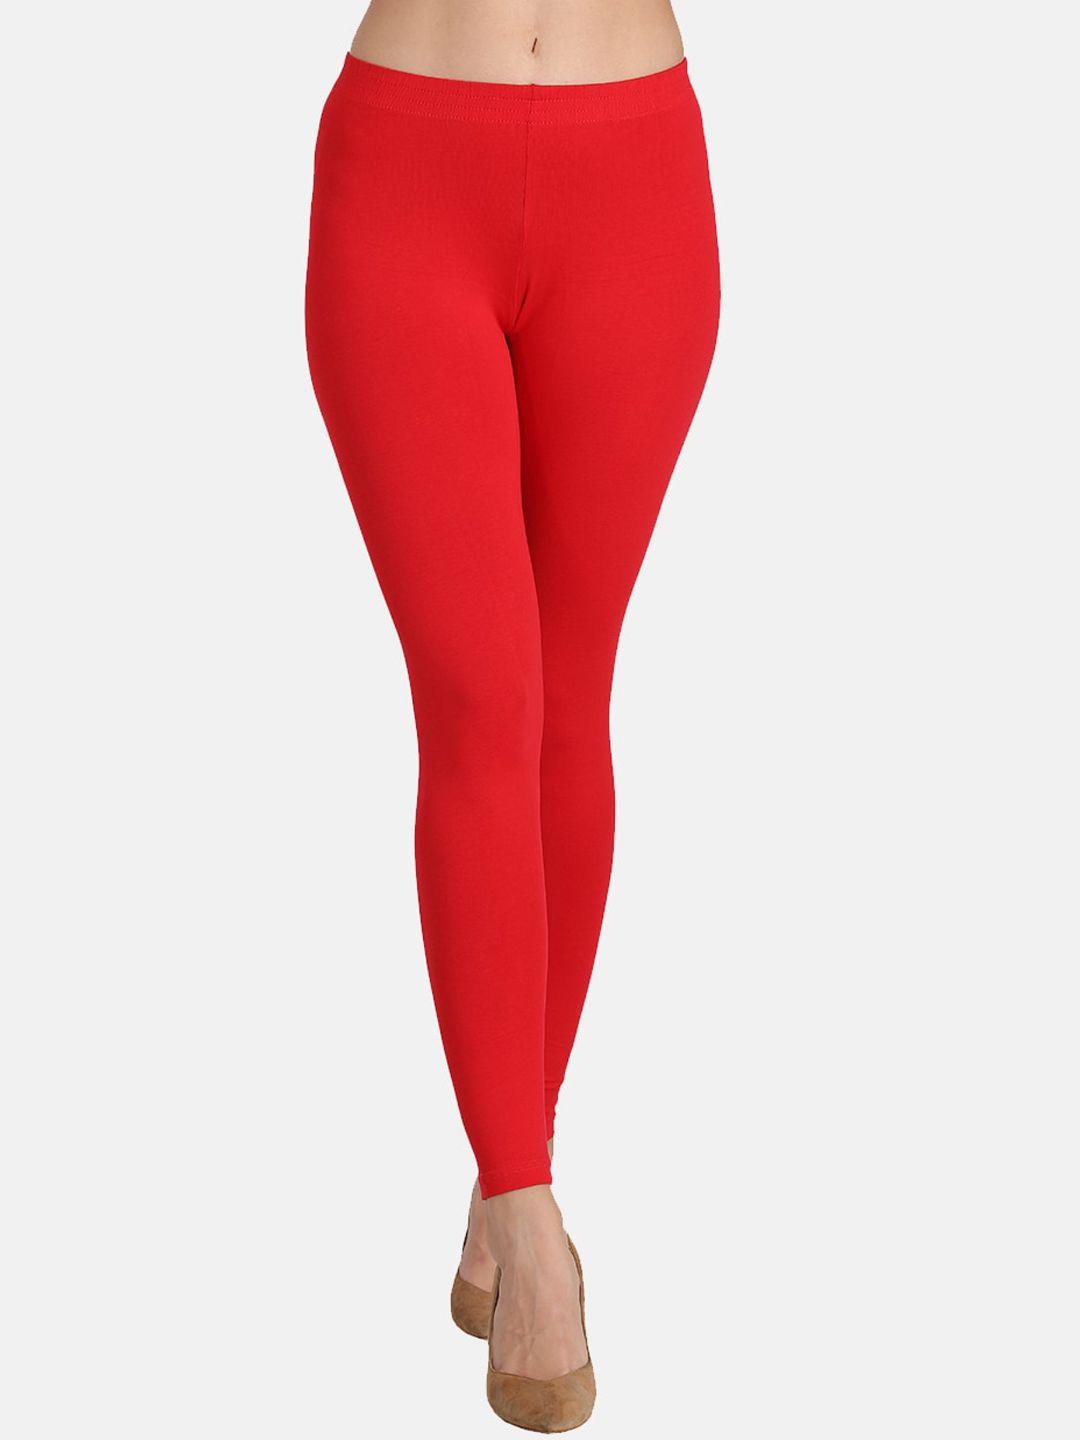 groversons paris beauty women red solid ankle length leggings